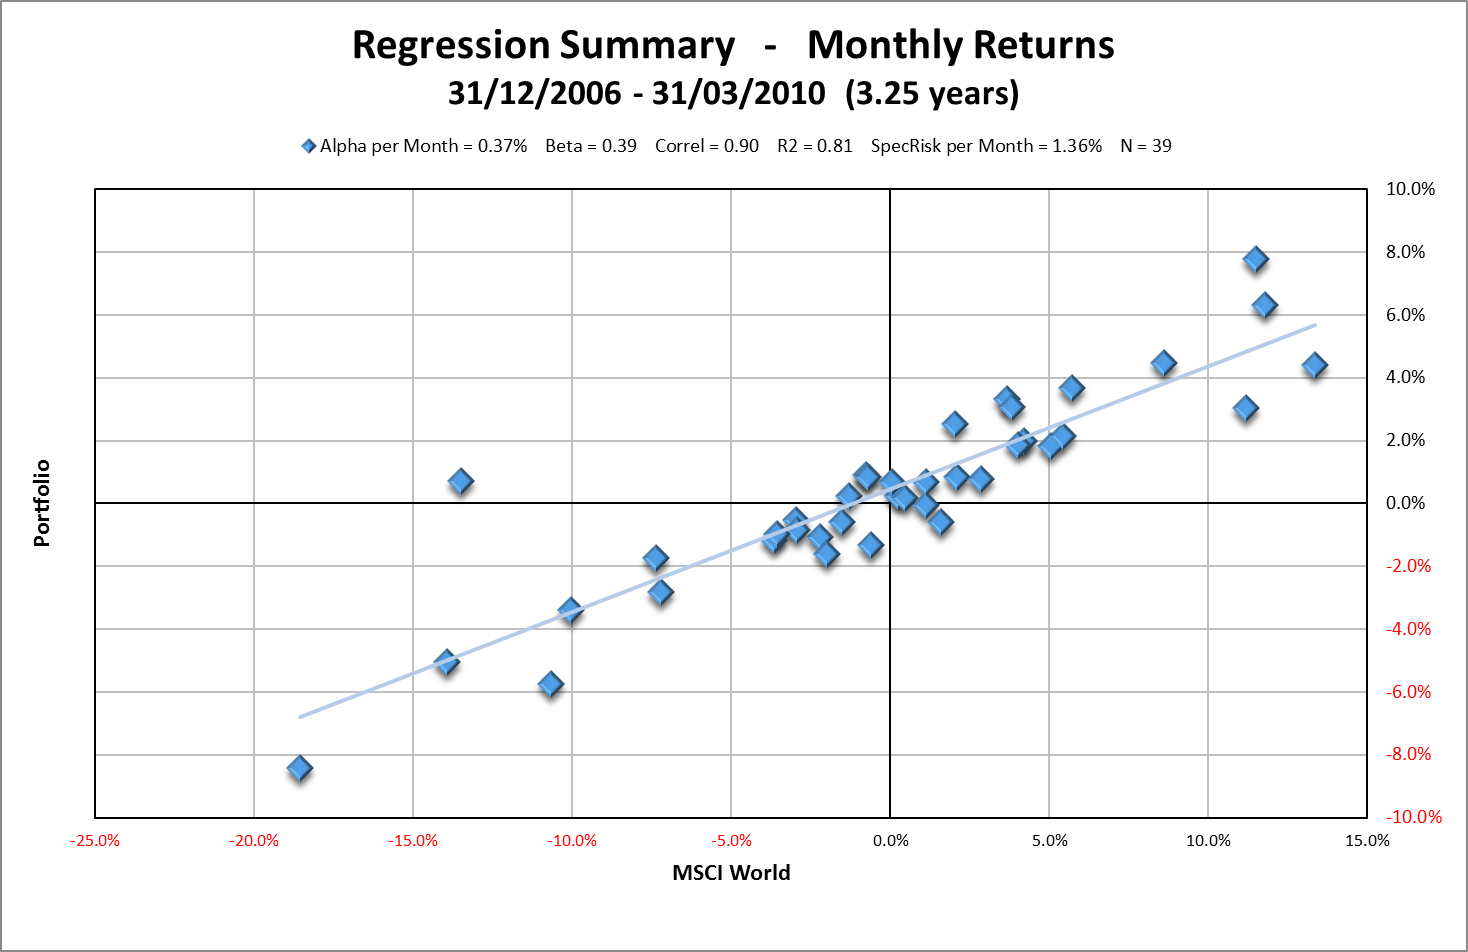 Regression of monthly returns